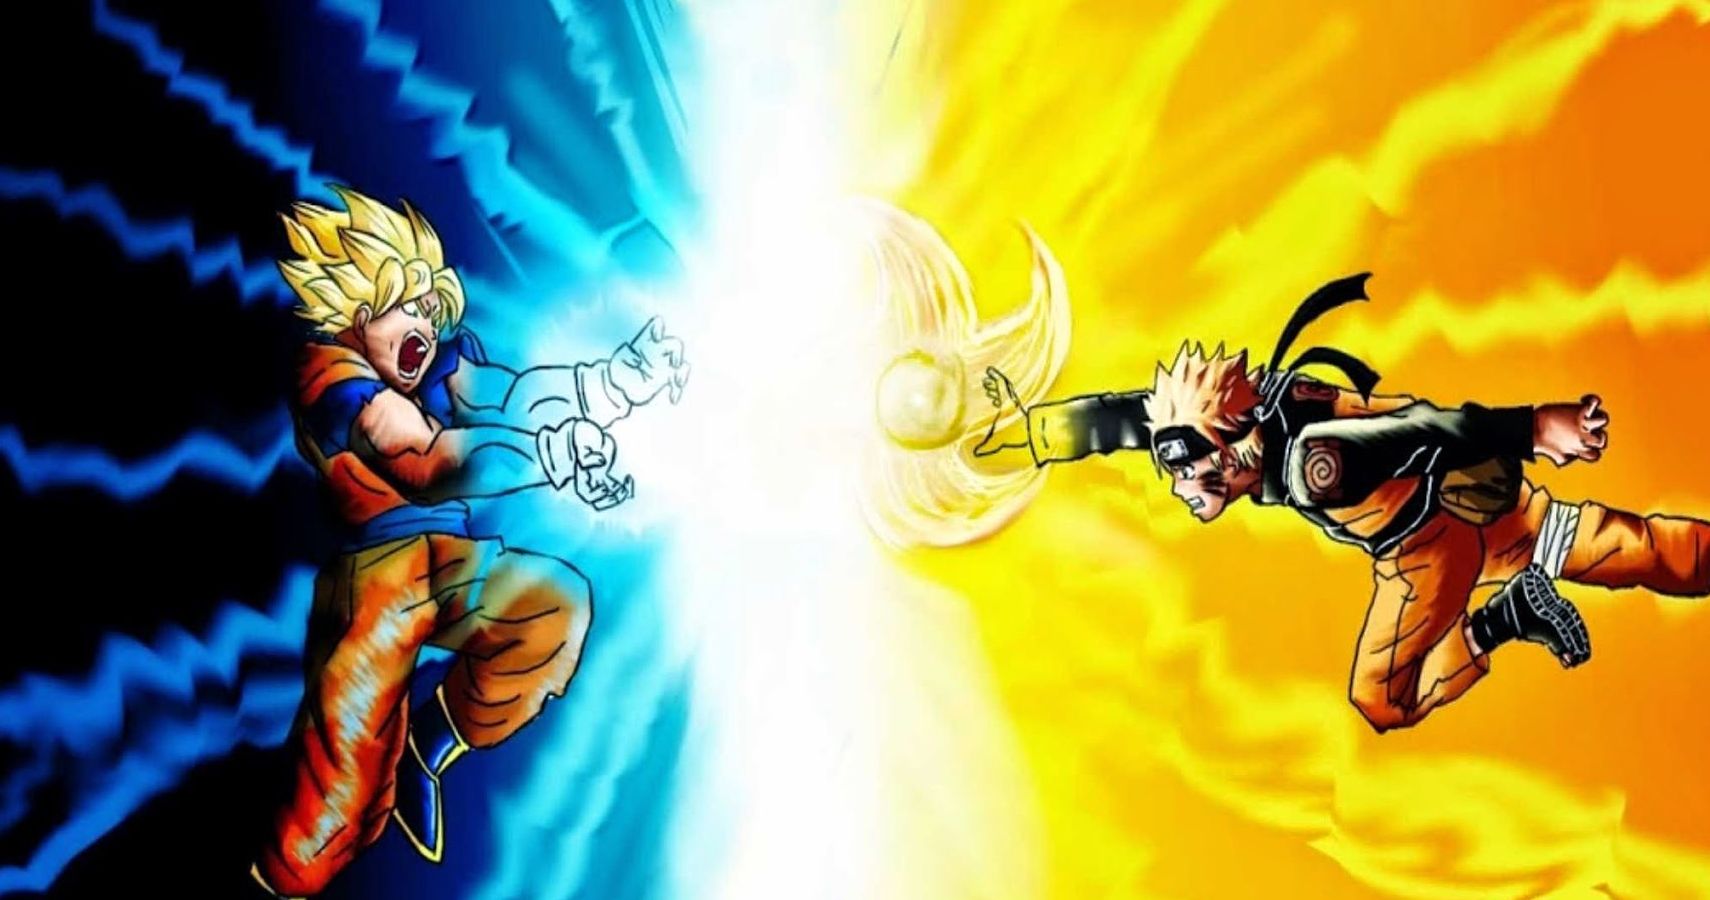 10 Reasons Why Goku Could Destroy Naruto (And 10 Why Naruto Would Win)